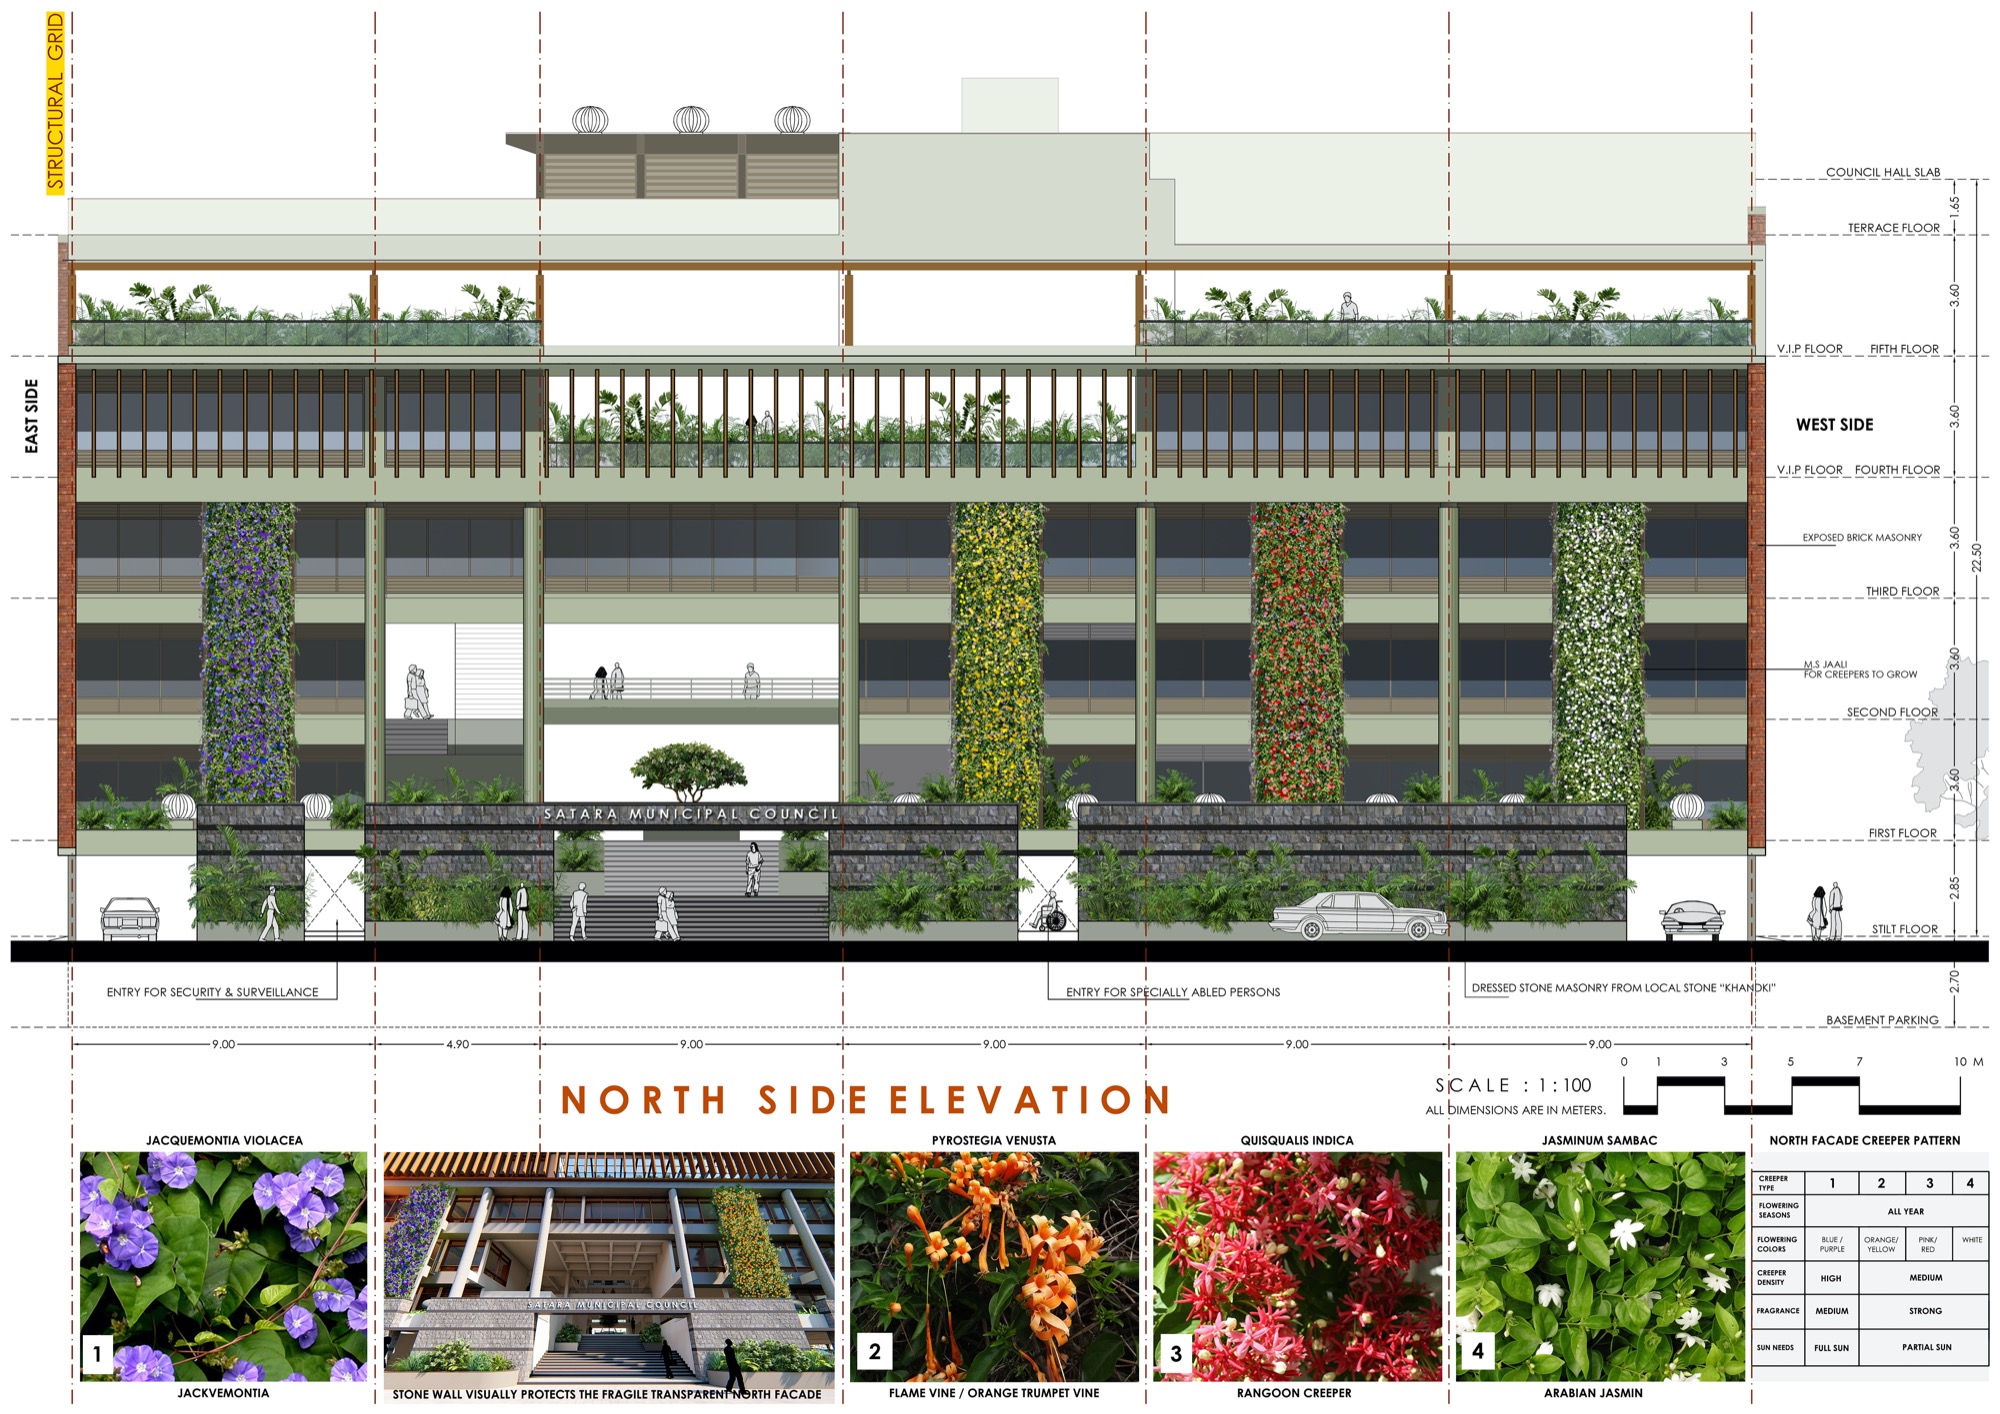 Satara Municipal Corporation, Competition Entry by KENARCH Architects, Pune 56